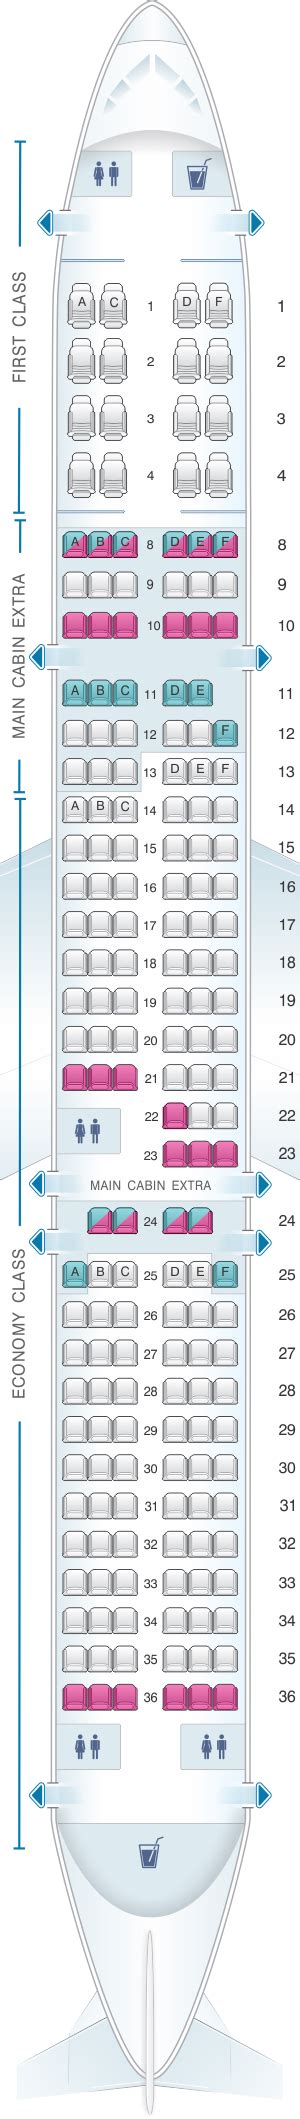 American Airlines Airbus A321 Seat Map; Seat 28a; American Airlines Reviews. Seating Charts · Airbus A319 · Airbus A319 (MCE) · Airbus A320 Airbus A321 · Airbus A321 (transcon) · Airbus A321 (US Airways) · Airbus A330-200 · Airbus A330-300 · Boeing 737 MAX 8 · Boeing 737-800 · Boeing 737-800 (New MCE) · Boeing 757-200 · …. 